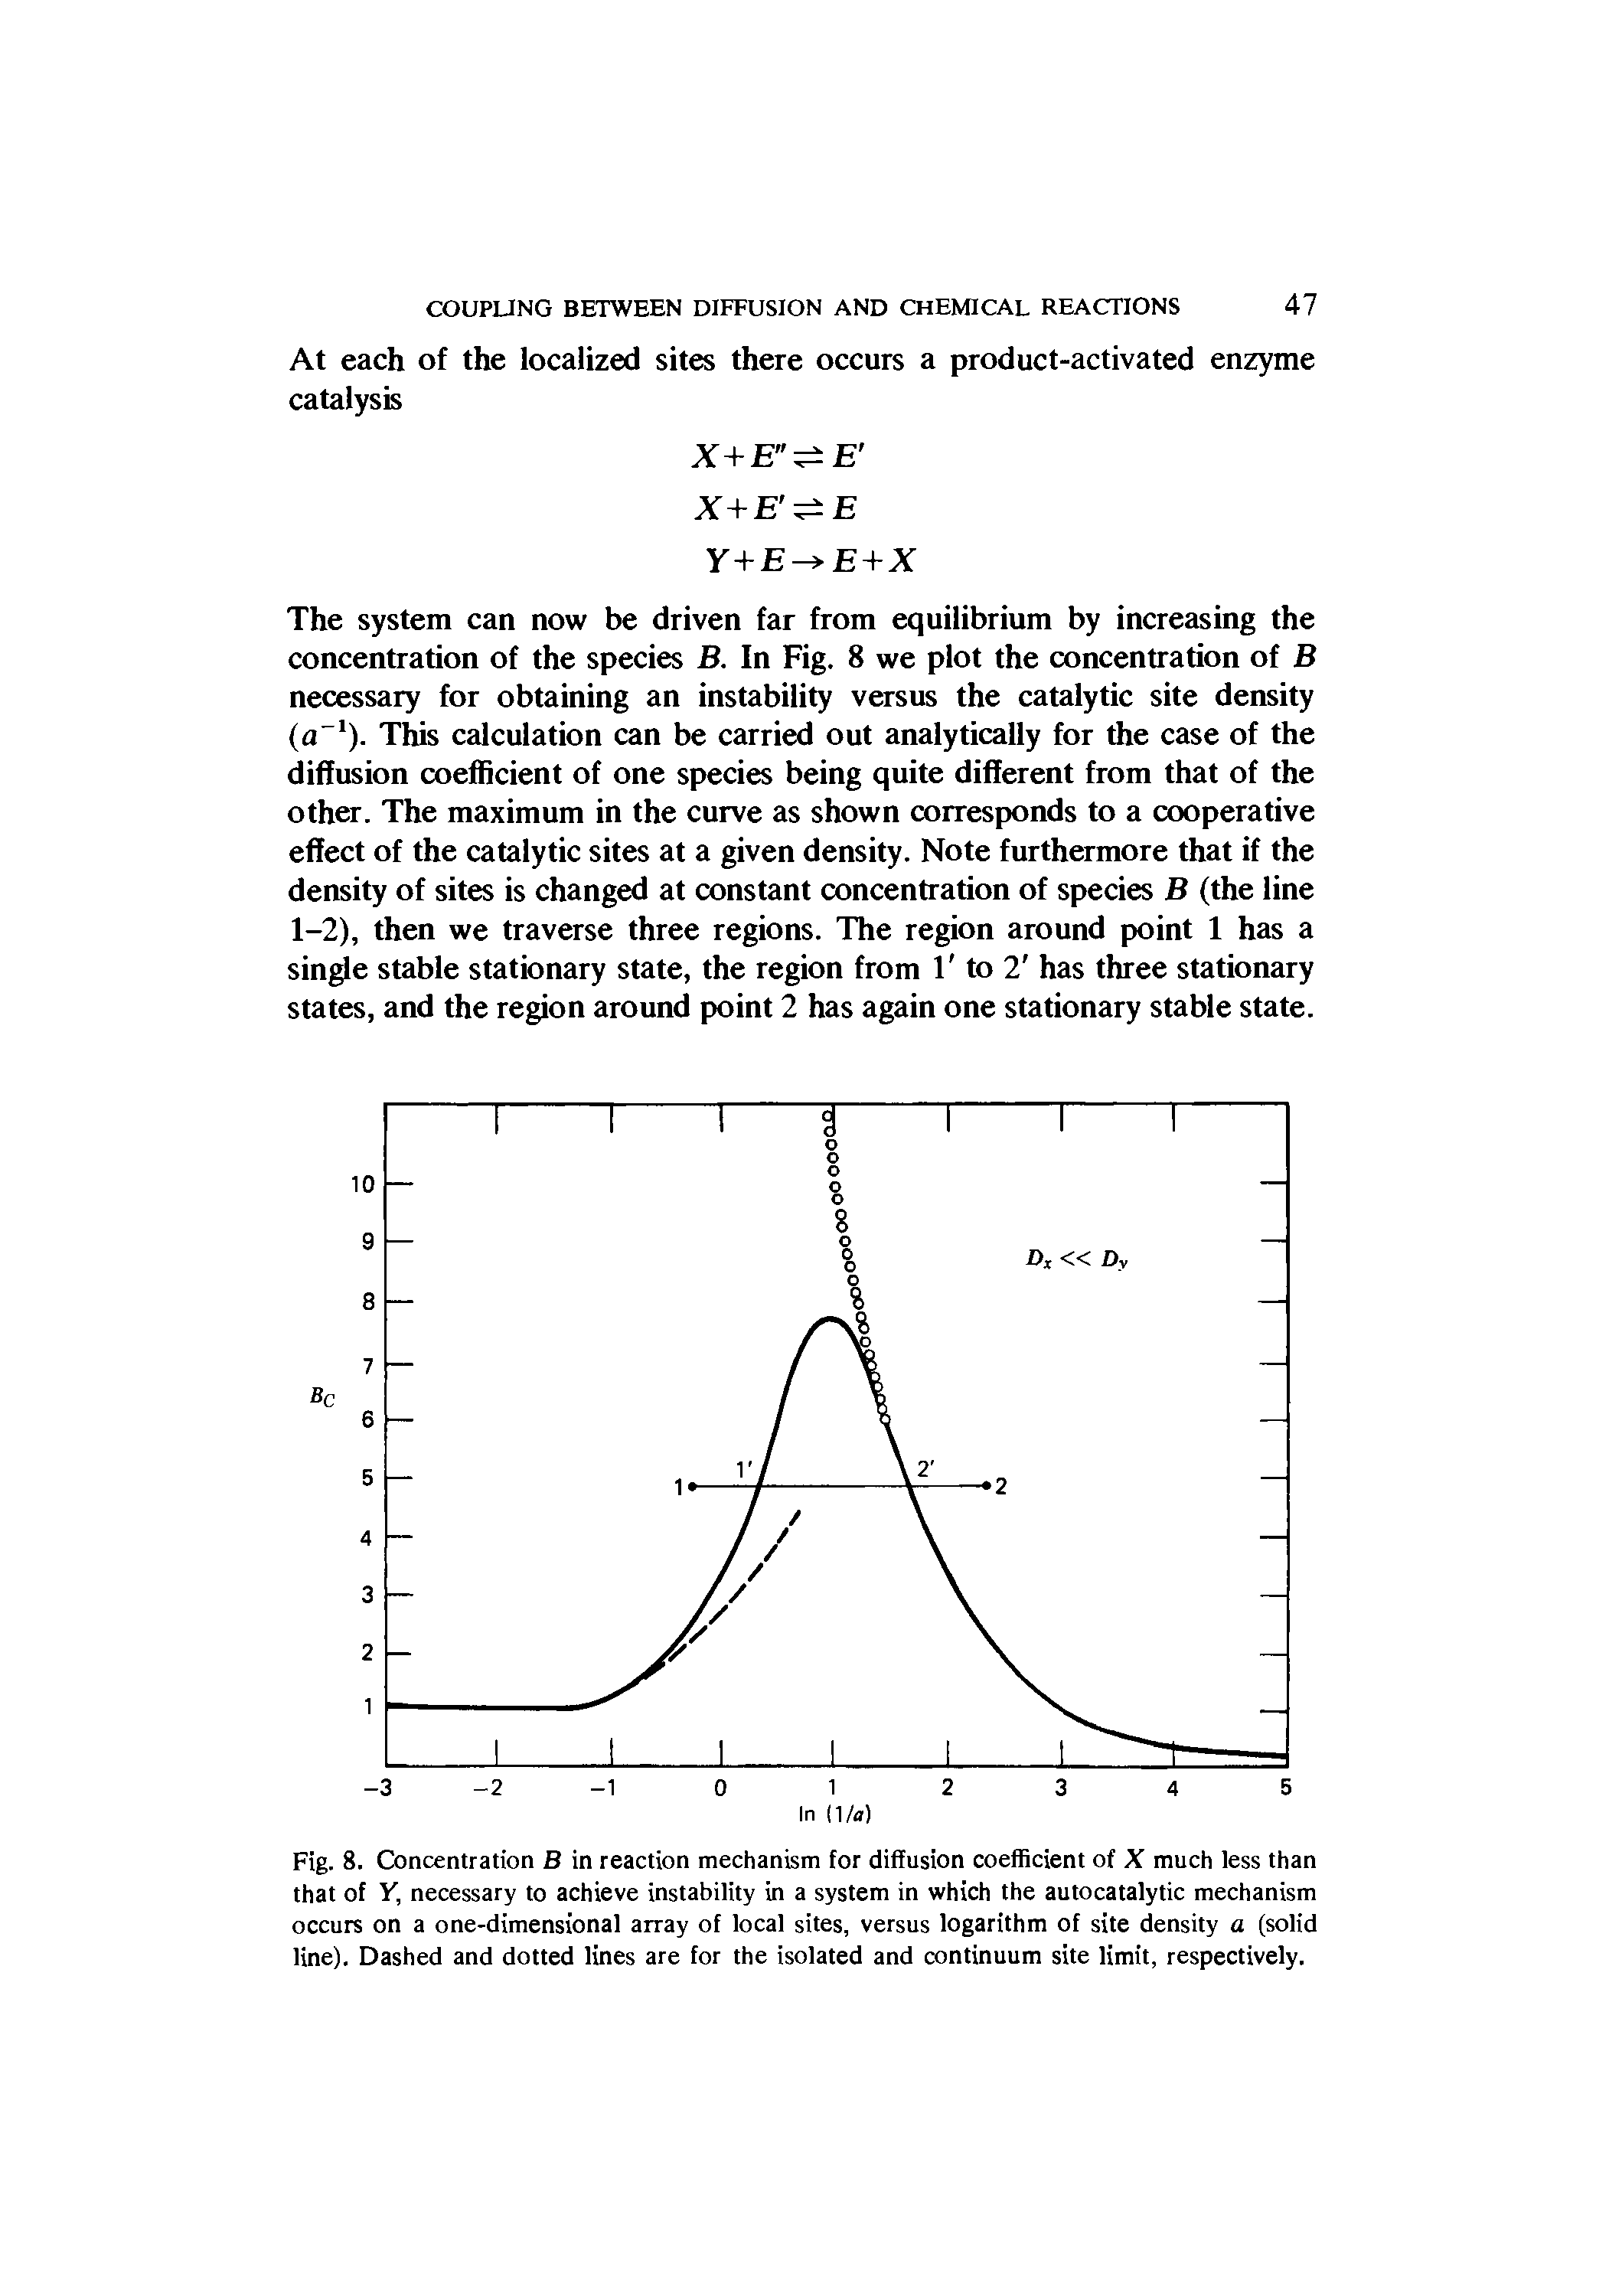 Fig. 8. Concentration B in reaction mechanism for diffusion coefficient of X much less than that of Y, necessary to achieve instability in a system in which the autocatalytic mechanism occurs on a one-dimensional array of local sites, versus logarithm of site density a (solid line). Dashed and dotted lines are for the isolated and continuum site limit, respectively.